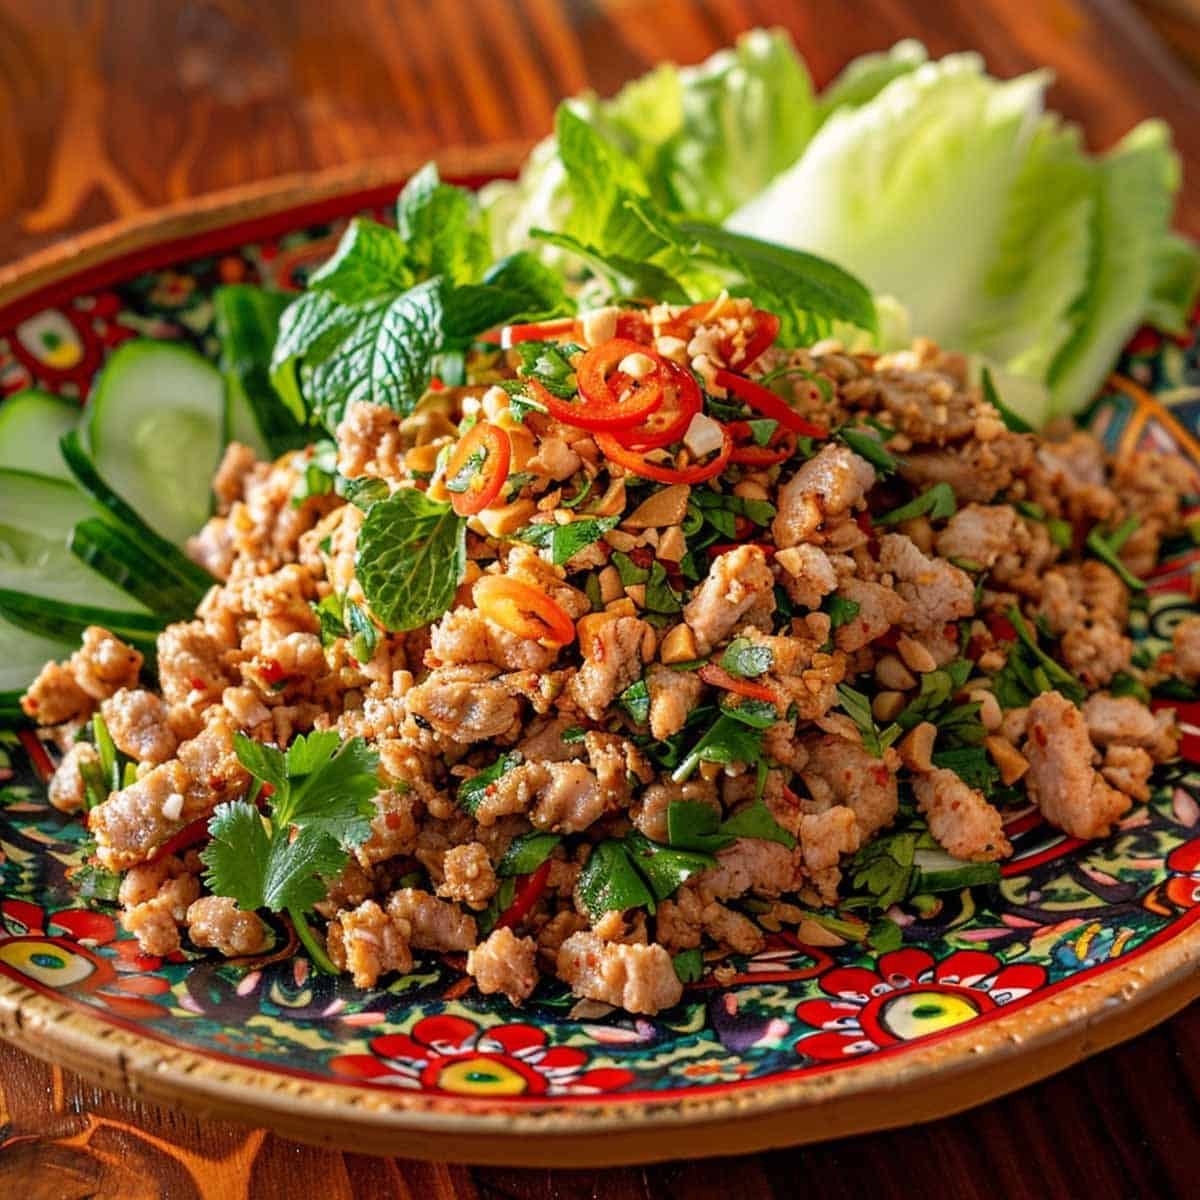 A plate of Larb, also known as Laab, beautifully presented with minced meat seasoned with lime juice, fish sauce, and chili flakes, garnished with fresh mint and cilantro, and a sprinkle of toasted rice, served alongside crisp lettuce leaves and cucombers.